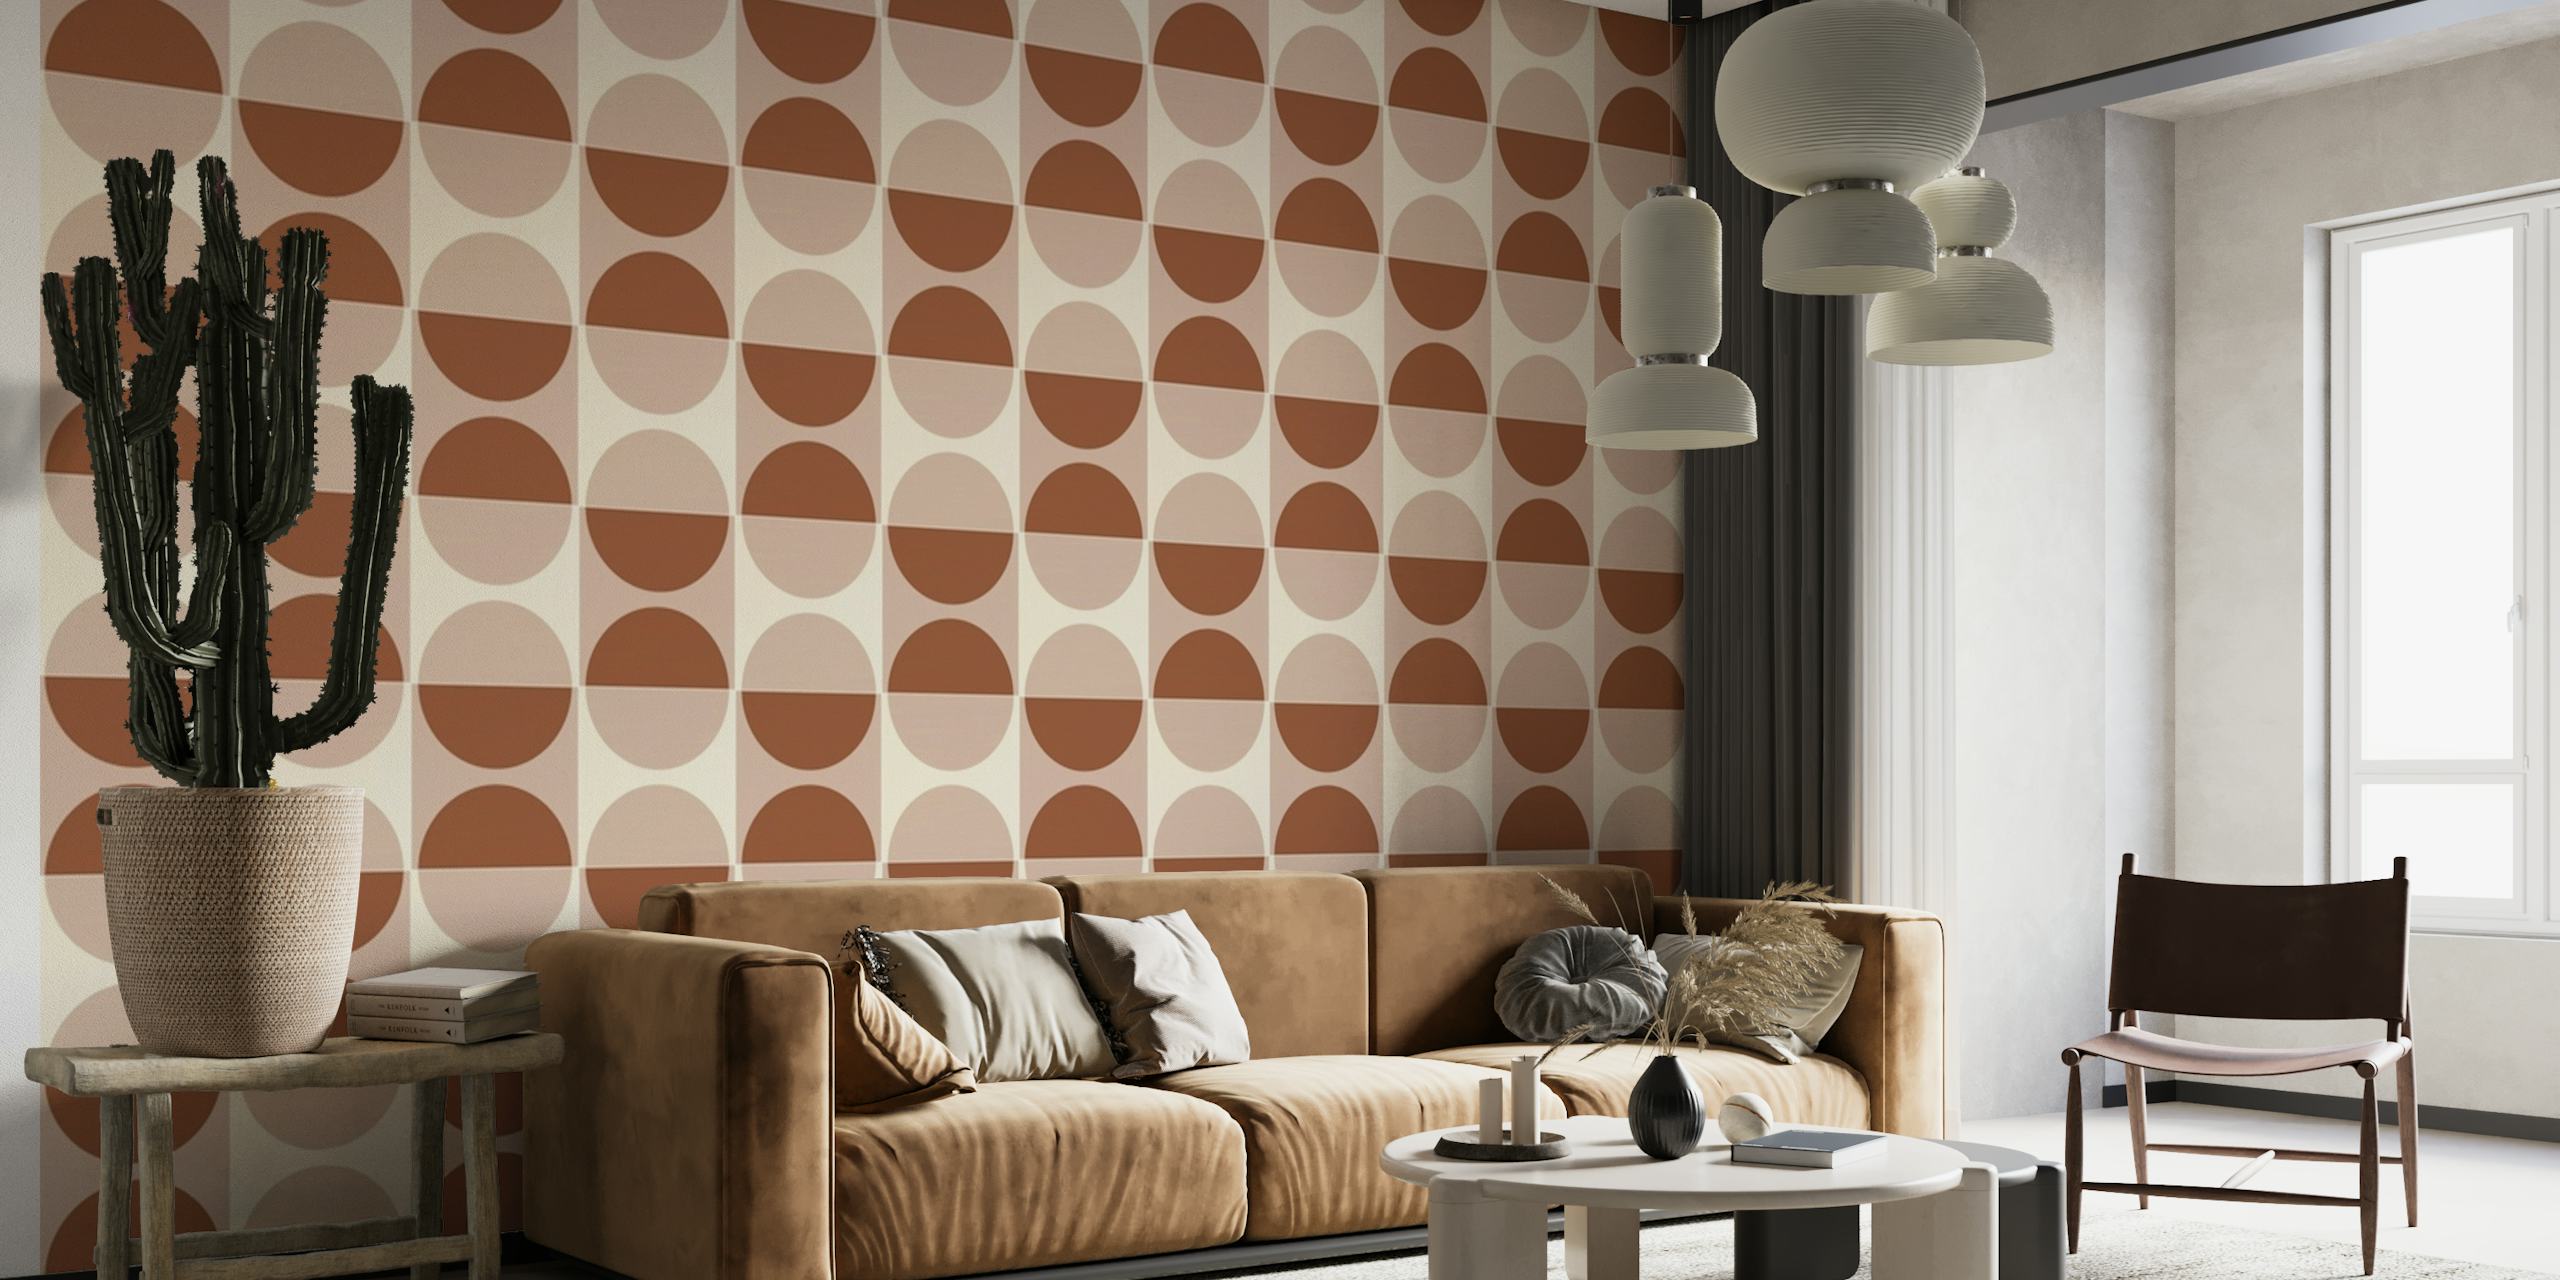 Painted Cotto Tiles Cinnamon and Powder wallpaper